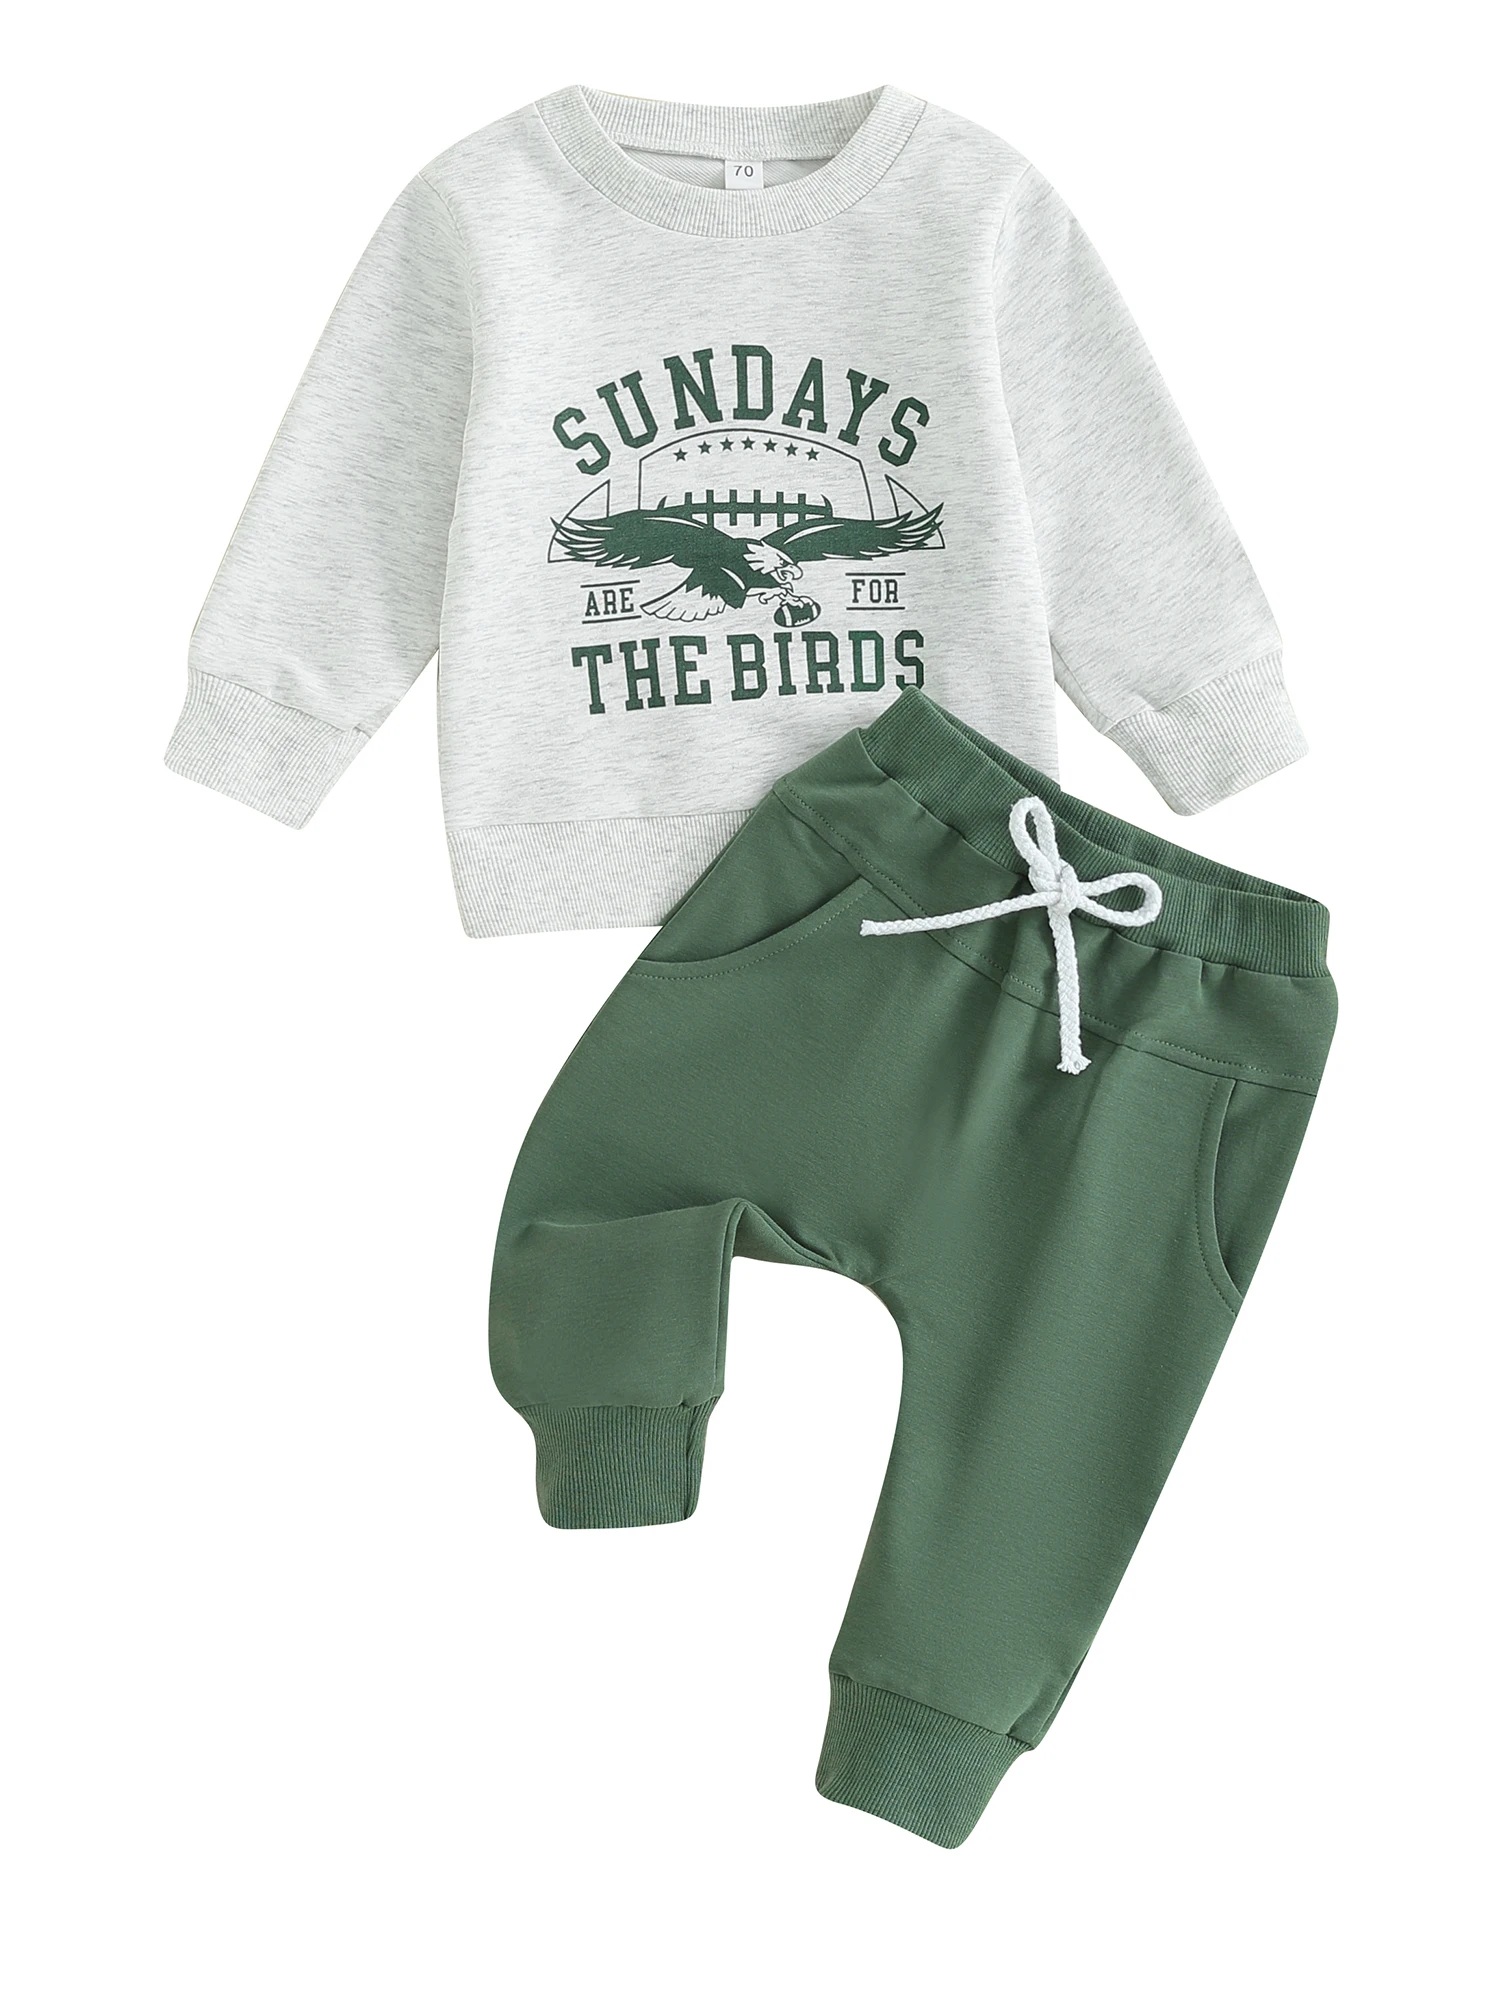 

Toddler Baby Boy Girl Fall Winter Outfits Go Birds Fuzzy Embroidered Sweatshirt Top Pants Football Game Day Clothes